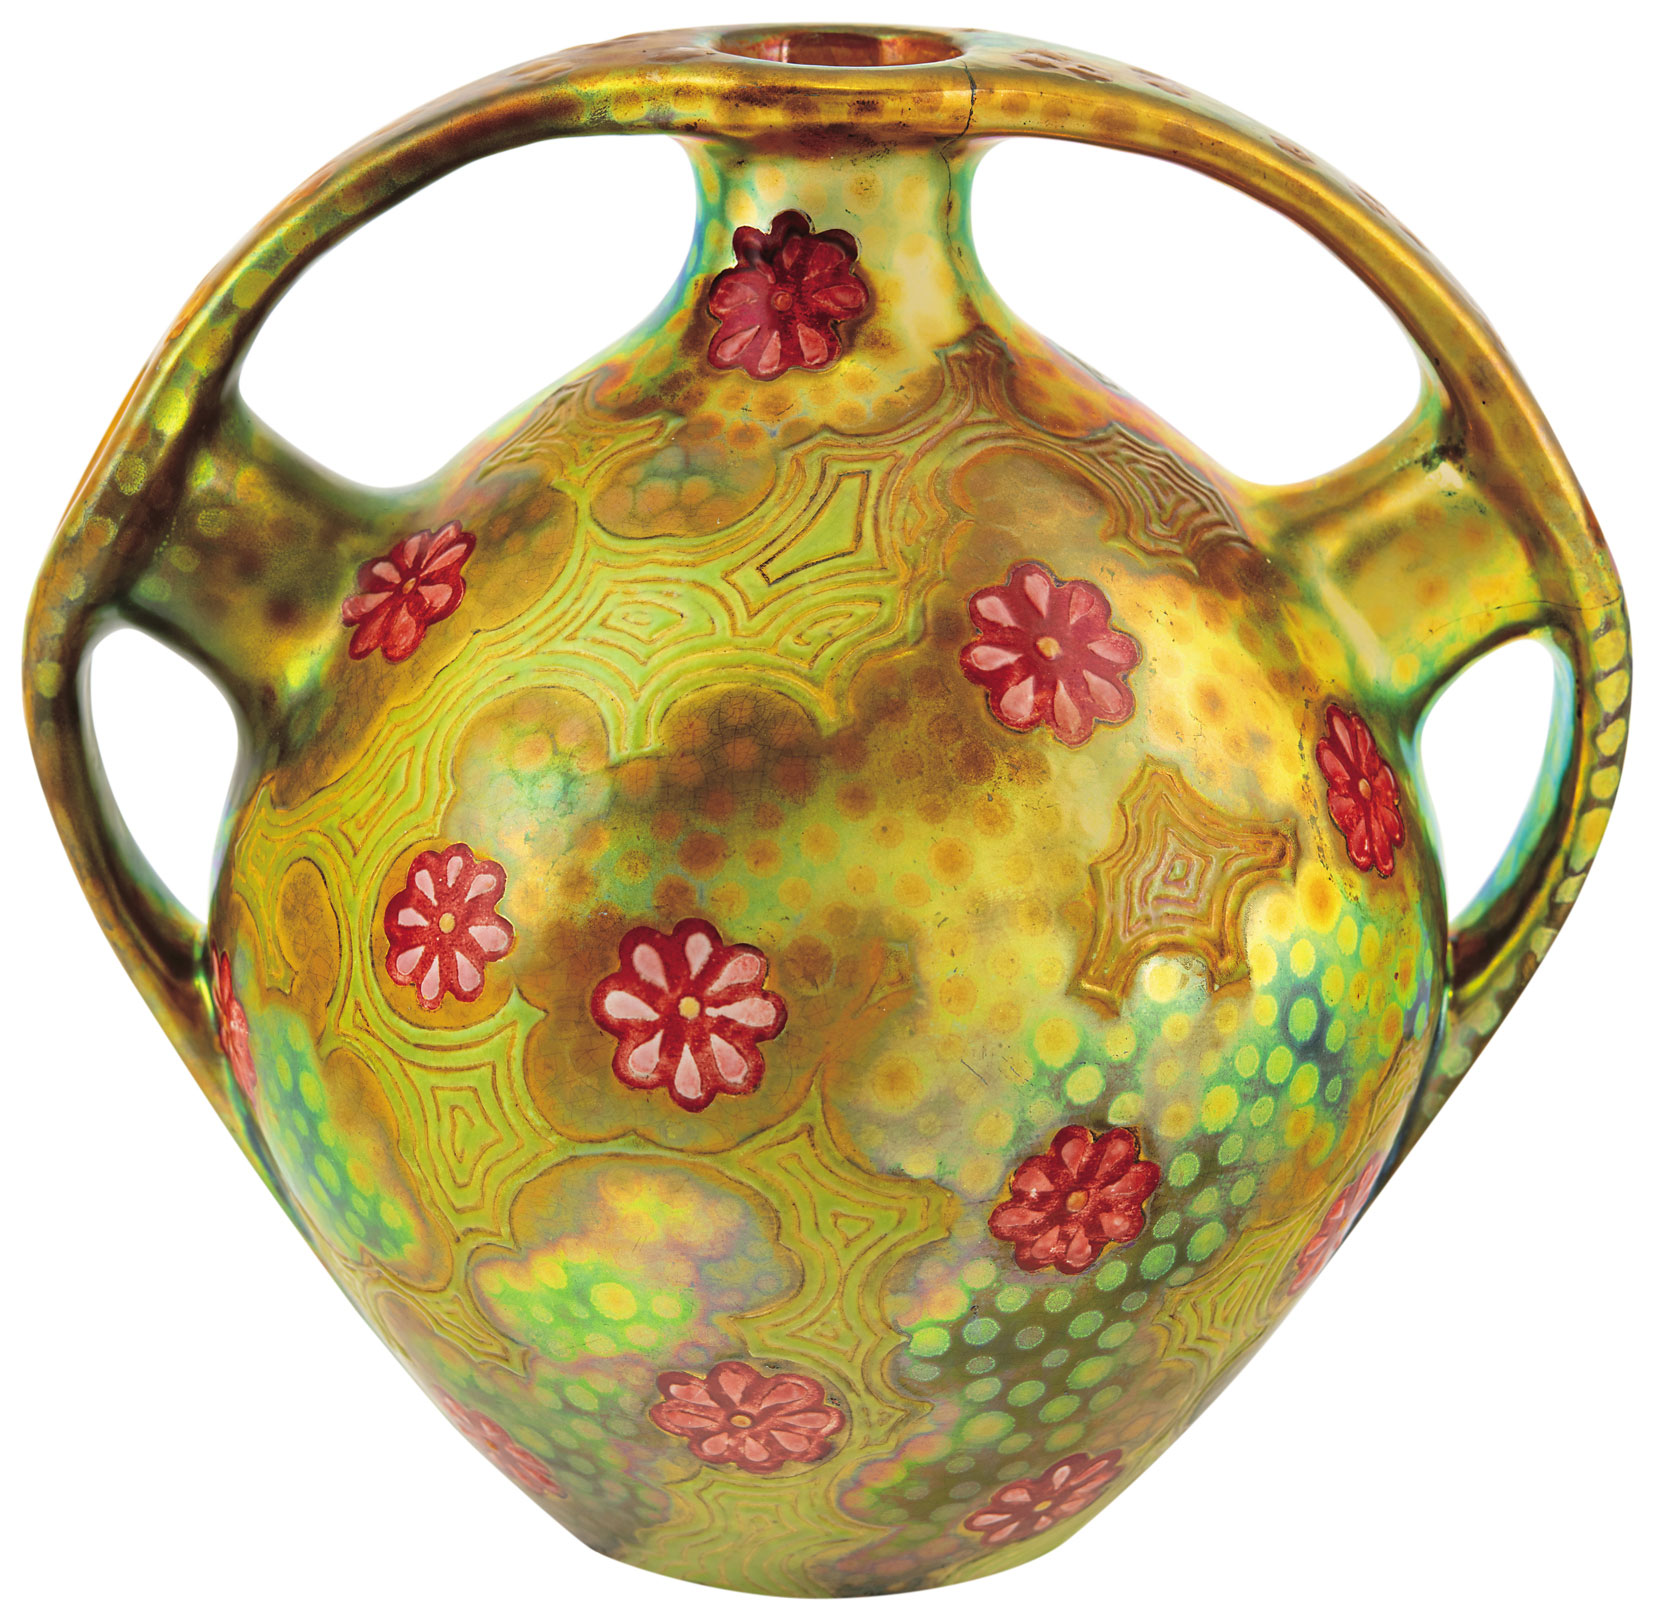 Zsolnay Vessel Decorated with Wild Flowers, 1902, PLAN BY APÁTI ABT, SÁNDOR